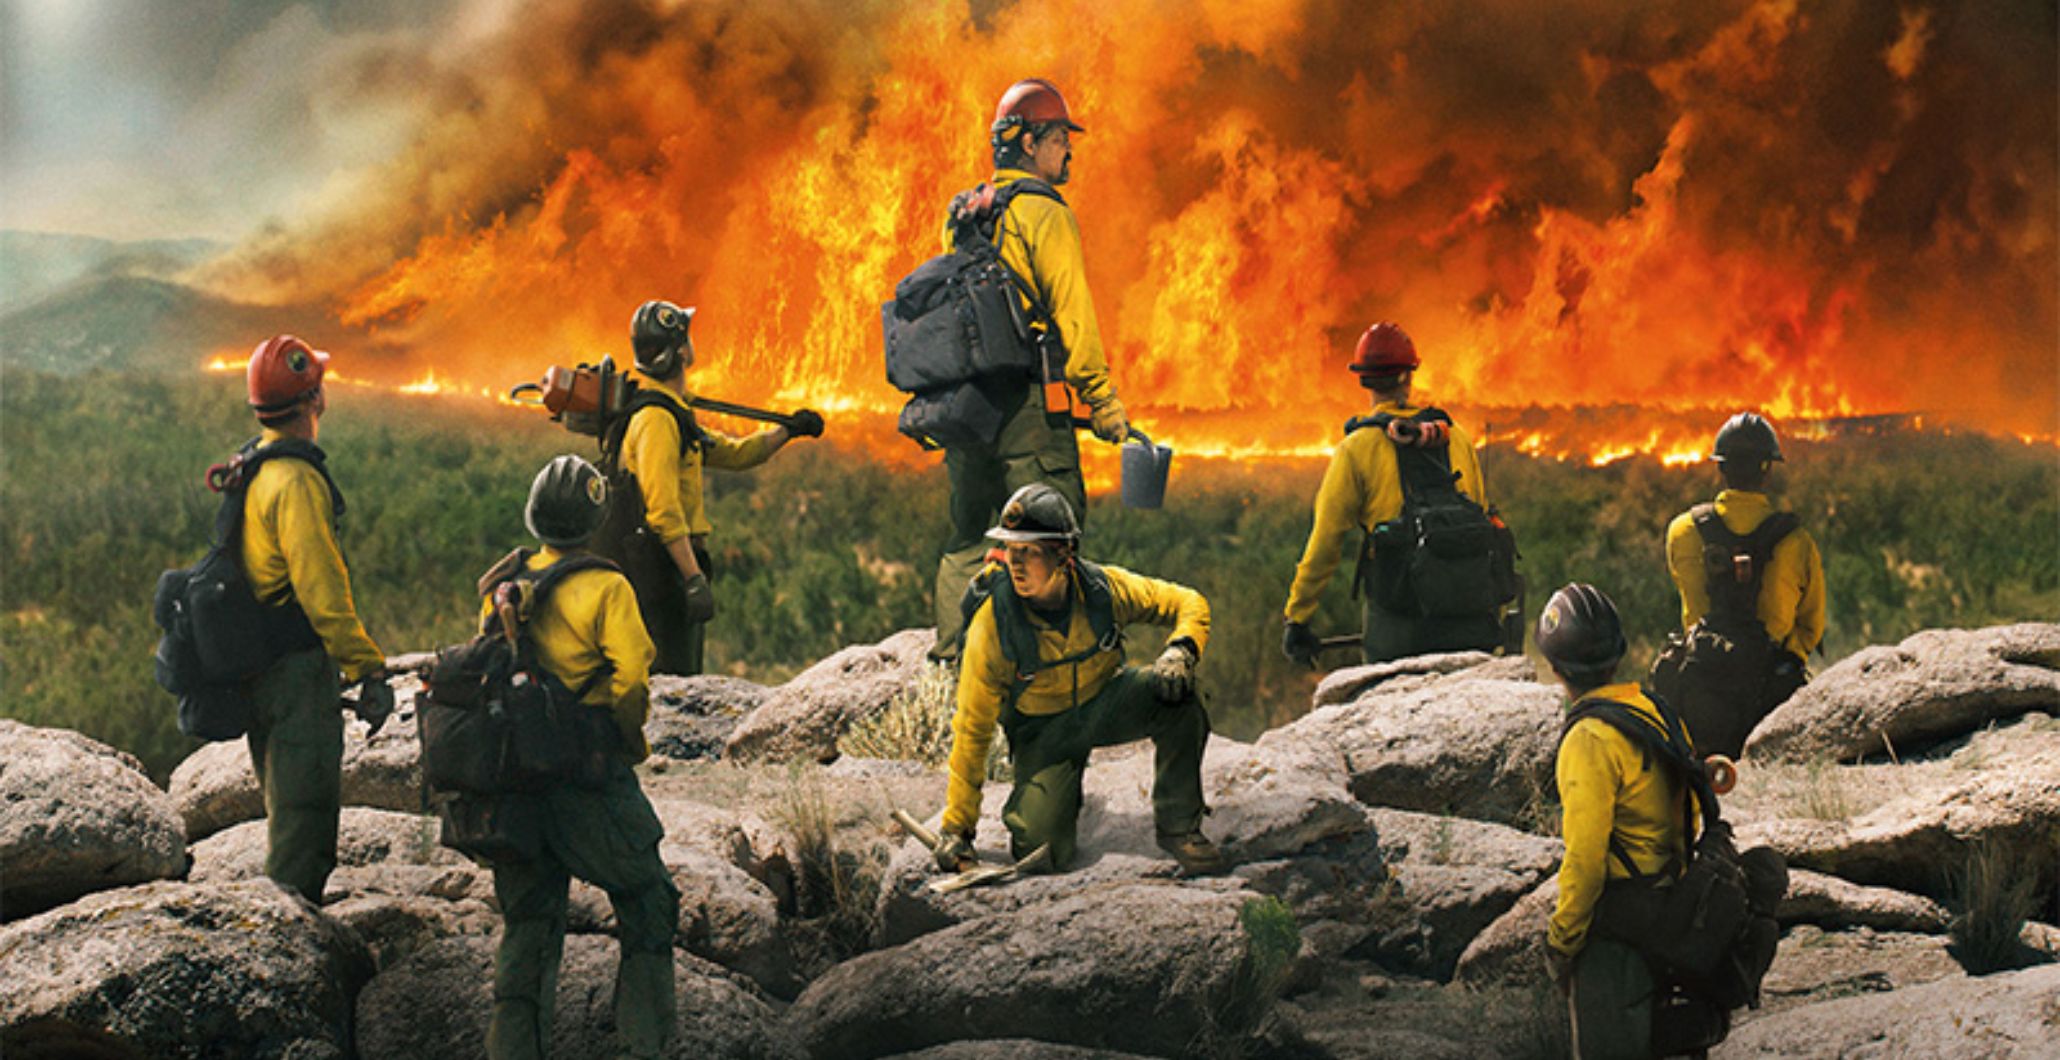 Movie Matinee: Only the Brave